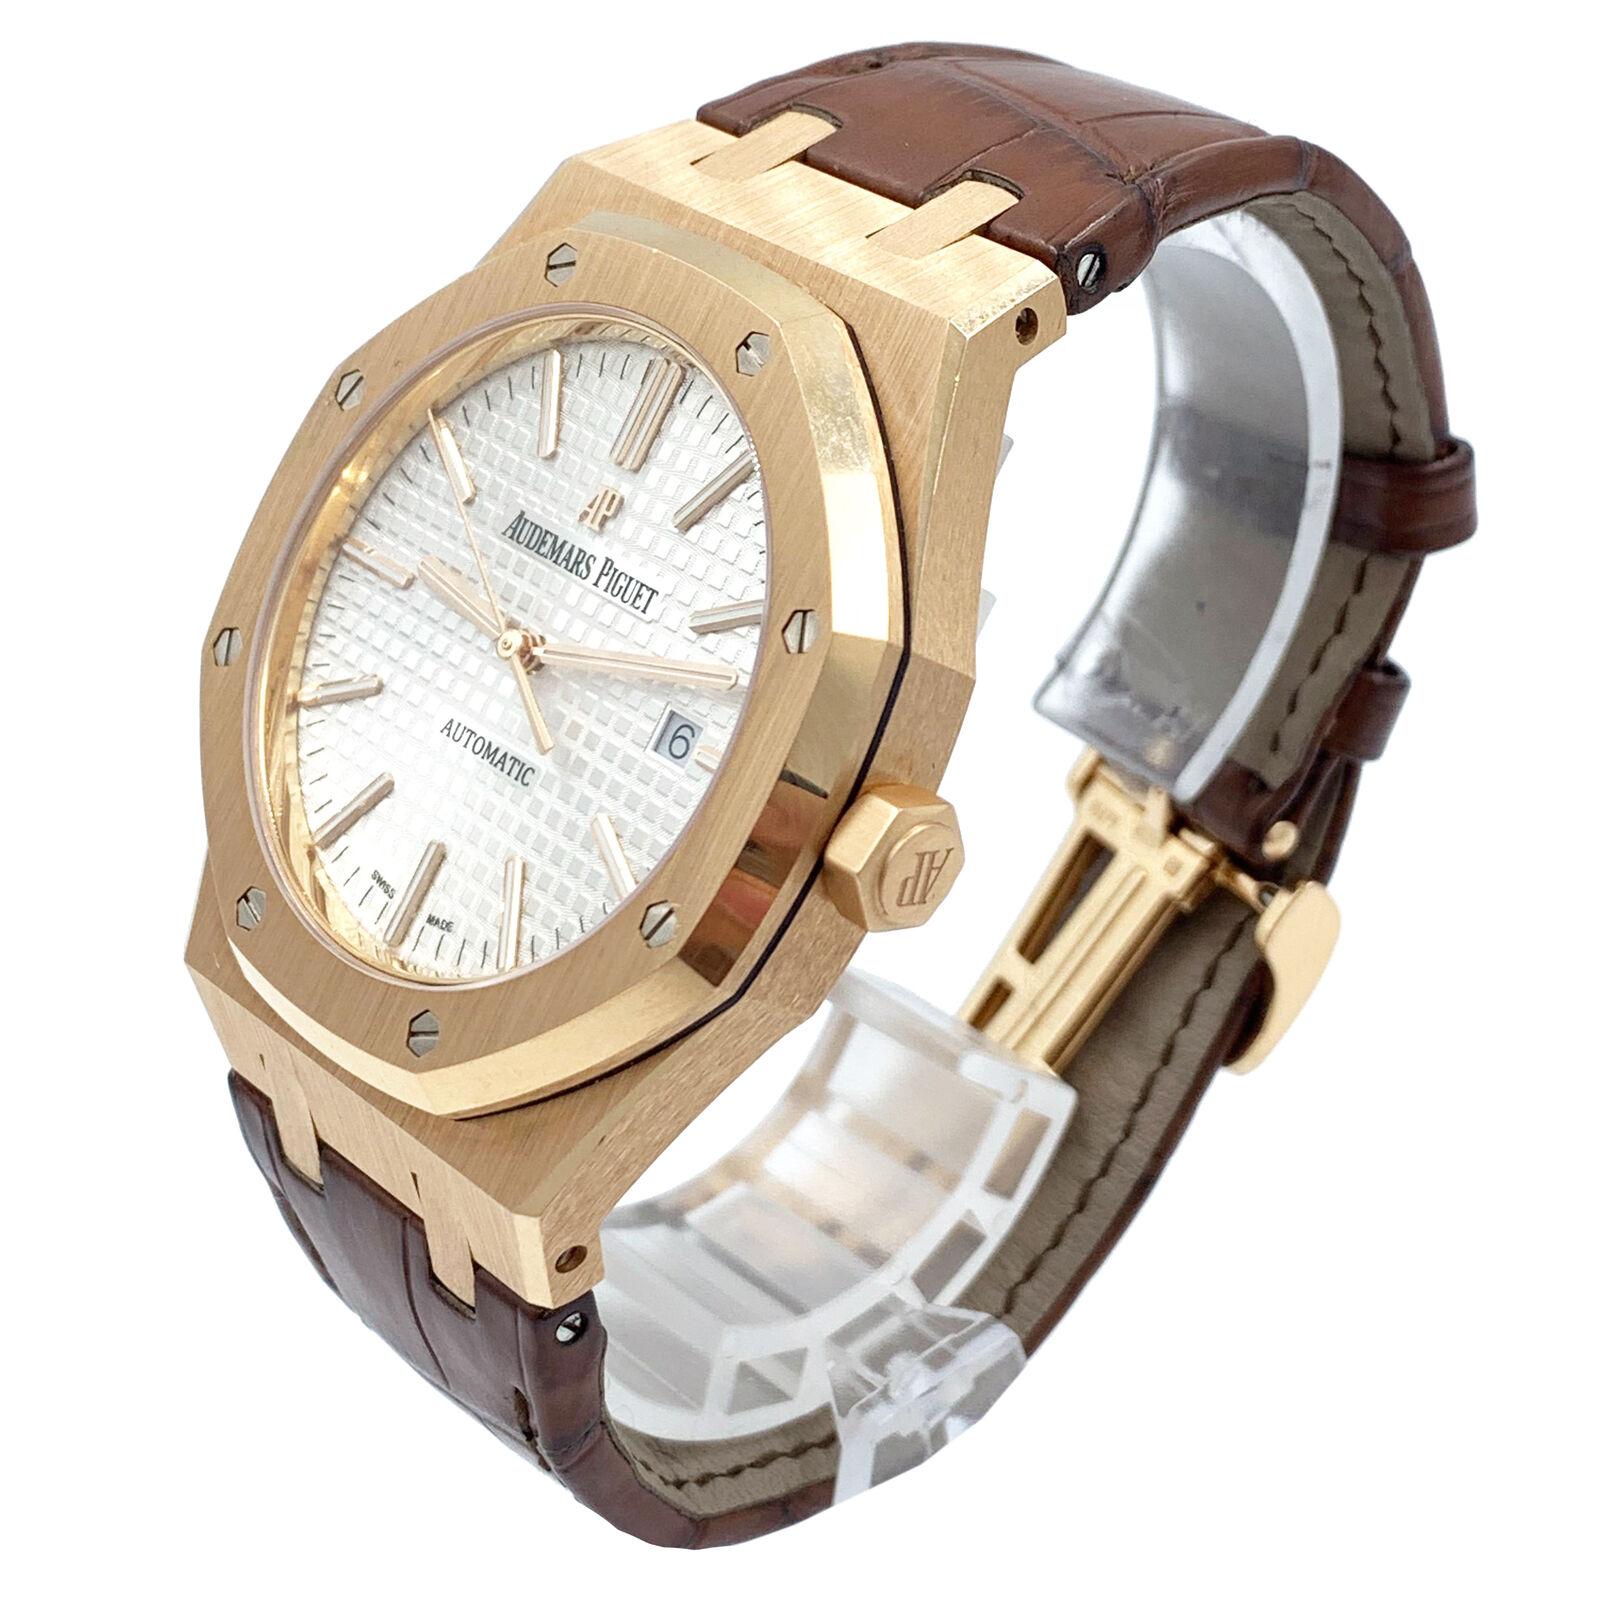 This pre-owned Audemars Piguet Royal Oak 15400OR.OO.D088CR.01 is a beautiful men's timepiece that is powered by an automatic movement which is cased in a rose gold case. It has a round shape face, date dial and has hand sticks style markers. It is